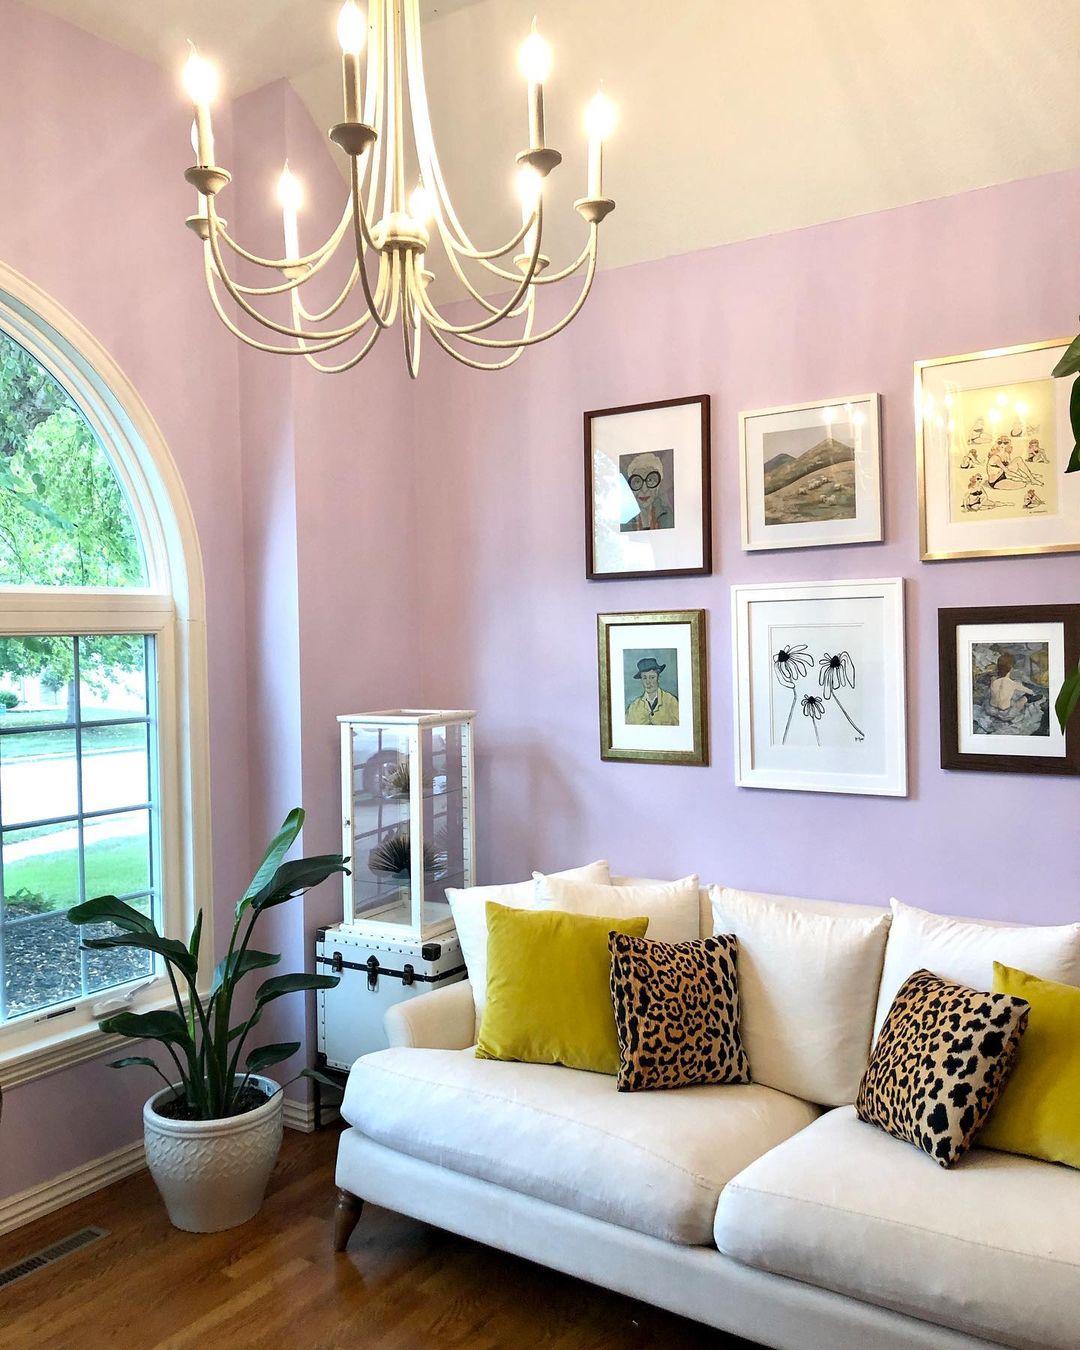 Sitting area with a lilac purple wall next to a bay window and potted plant with artwork on the wall. Photo by instagram user @sugarkanedesigns